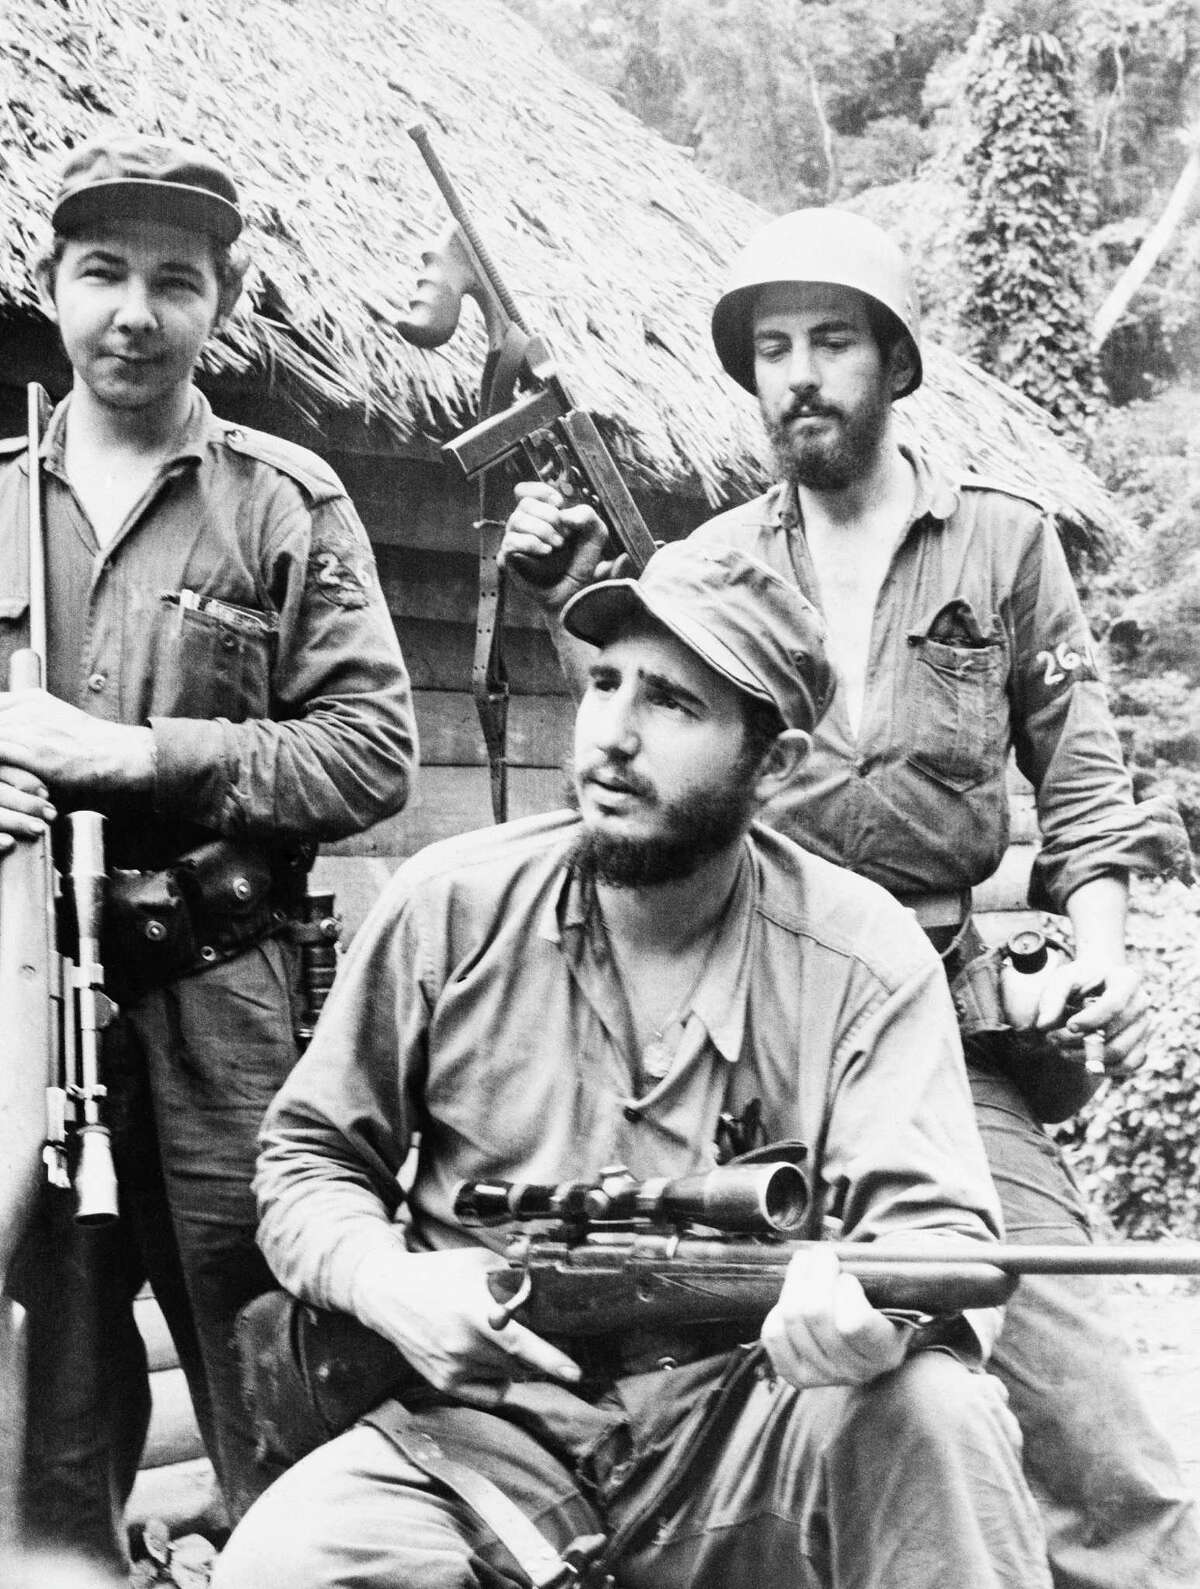 Key dates in U.S. relations with Cuba Jan. 1, 1959: Fidel Castro's rebels take power as dictator Fulgencio Batista flees Cuba. The United States soon recognizes the new government.